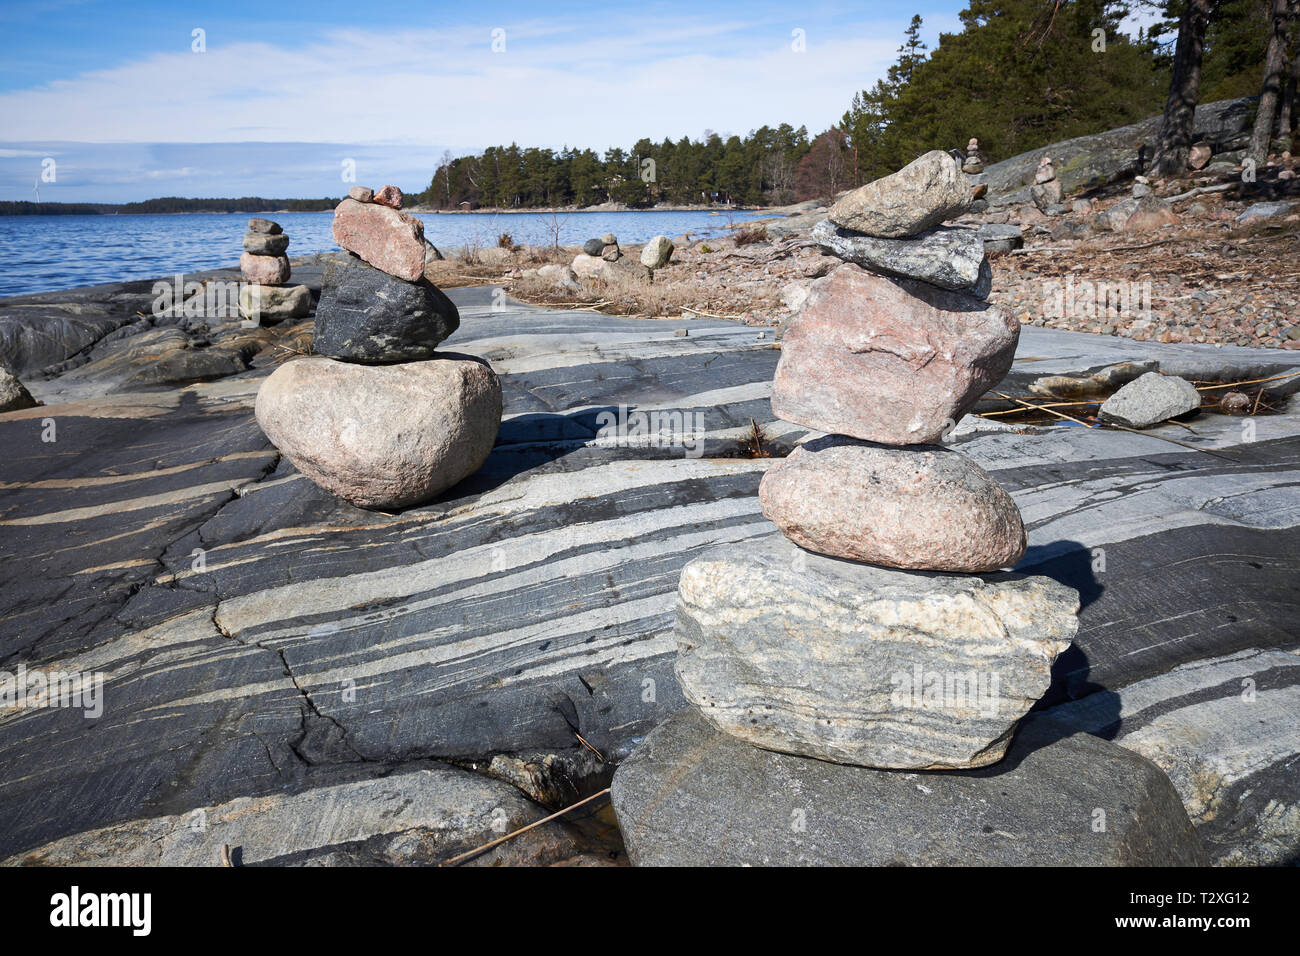 Peaceful summer landscape by the Baltic Sea in Kasnäs, Kemiö, Finland. Wide angle shot of the rocks on the seashore in the Finnish archipelago. Stock Photo